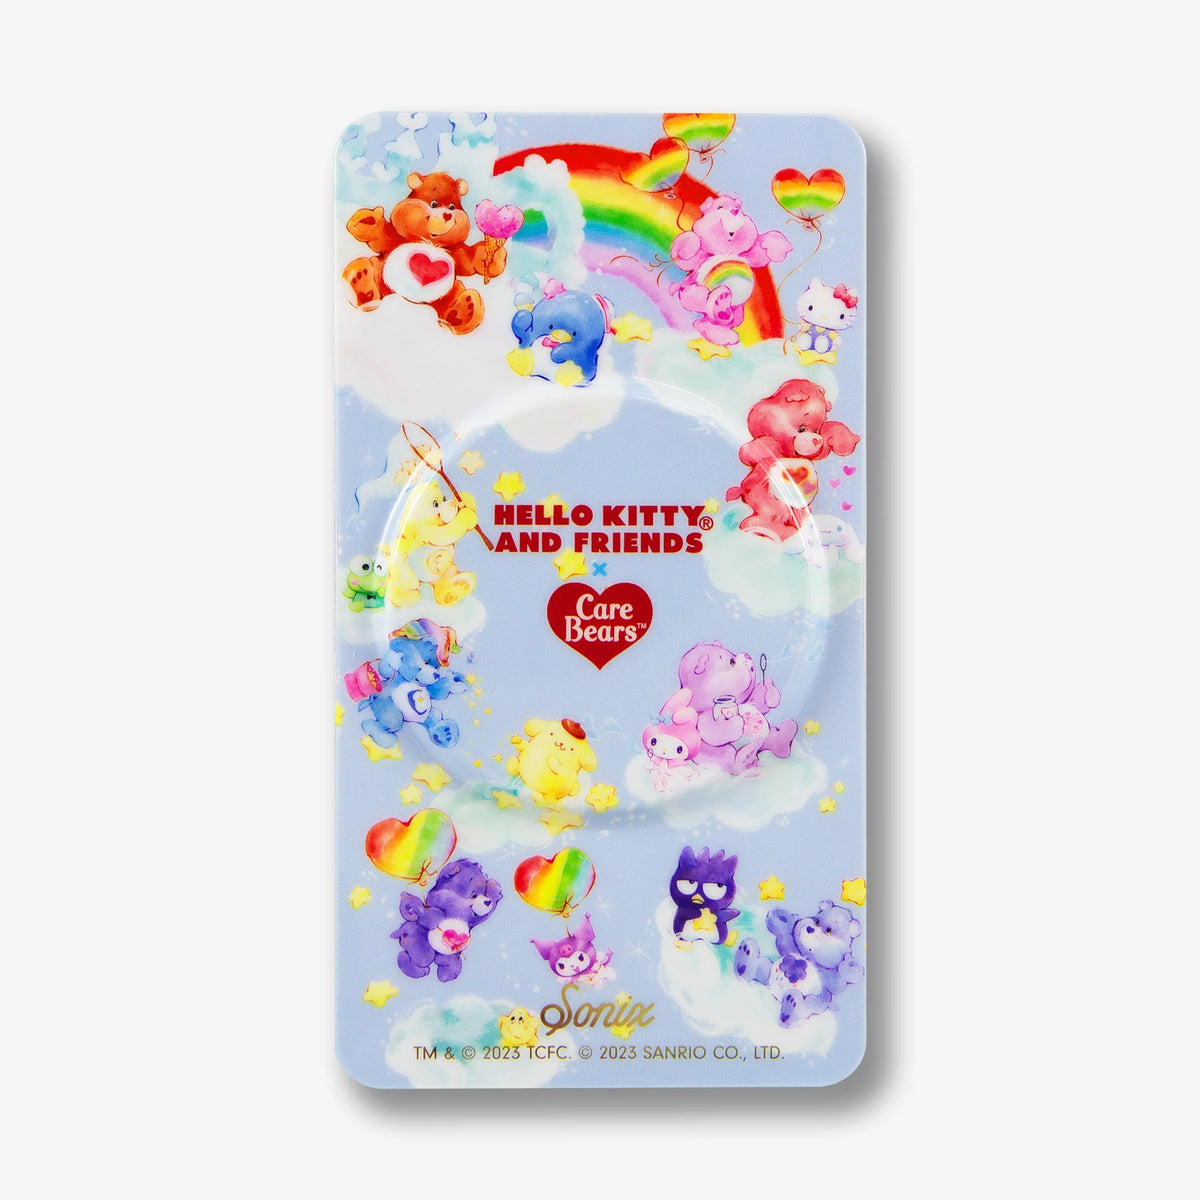 Hello Kitty and Friends x Care Bears Power Pack Accessory BySonix Inc.   